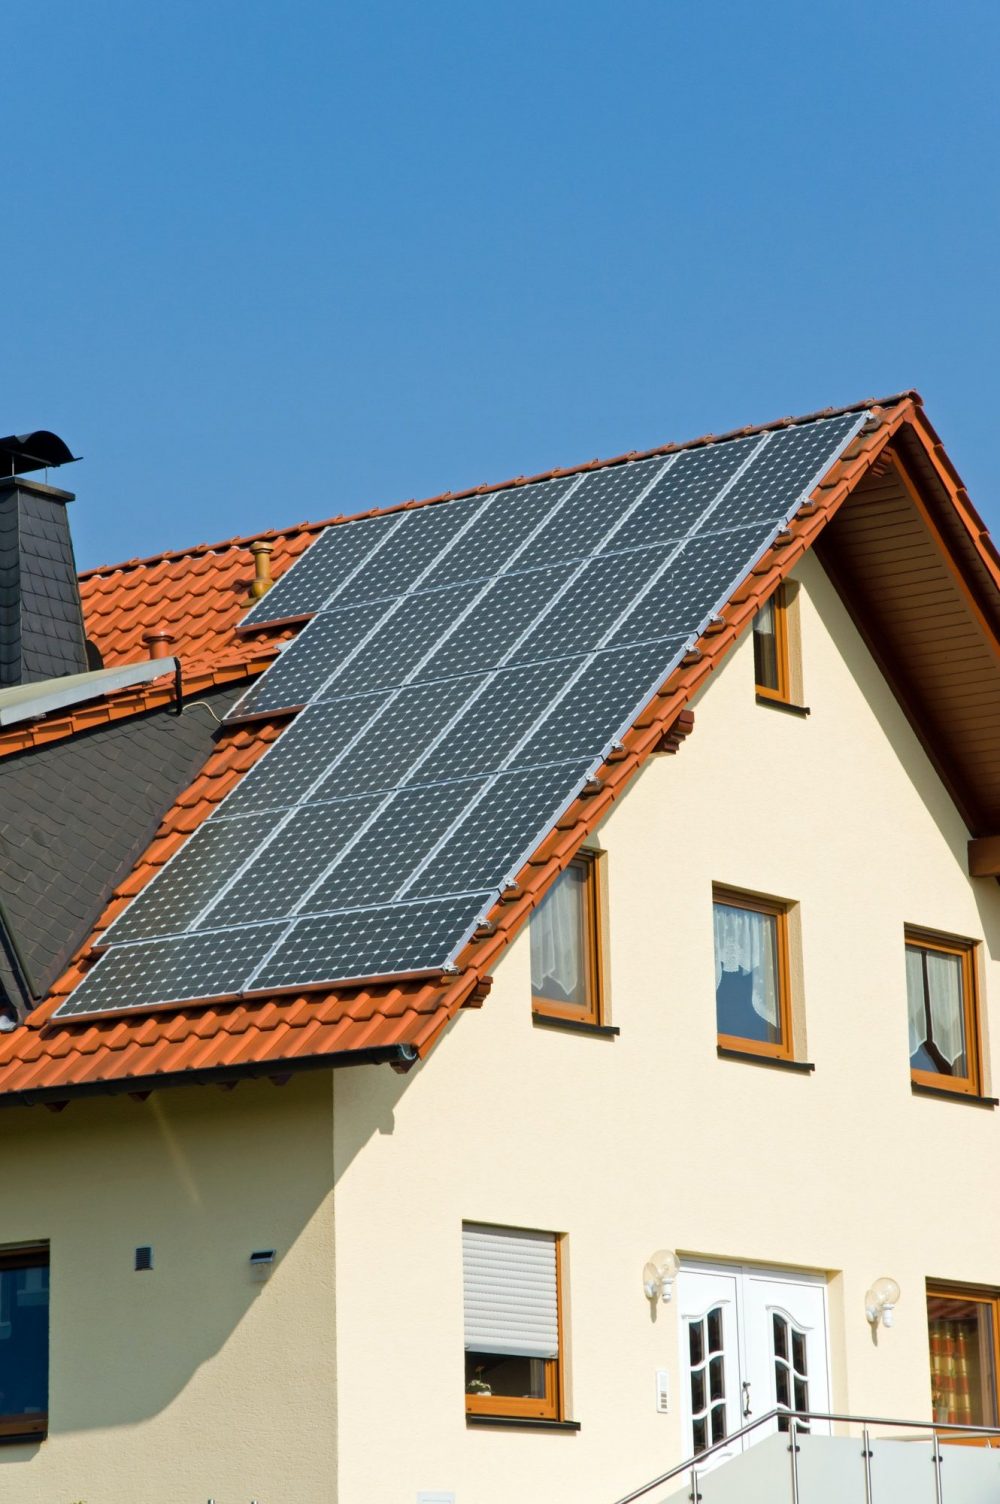 Roof with solar panels in Germany